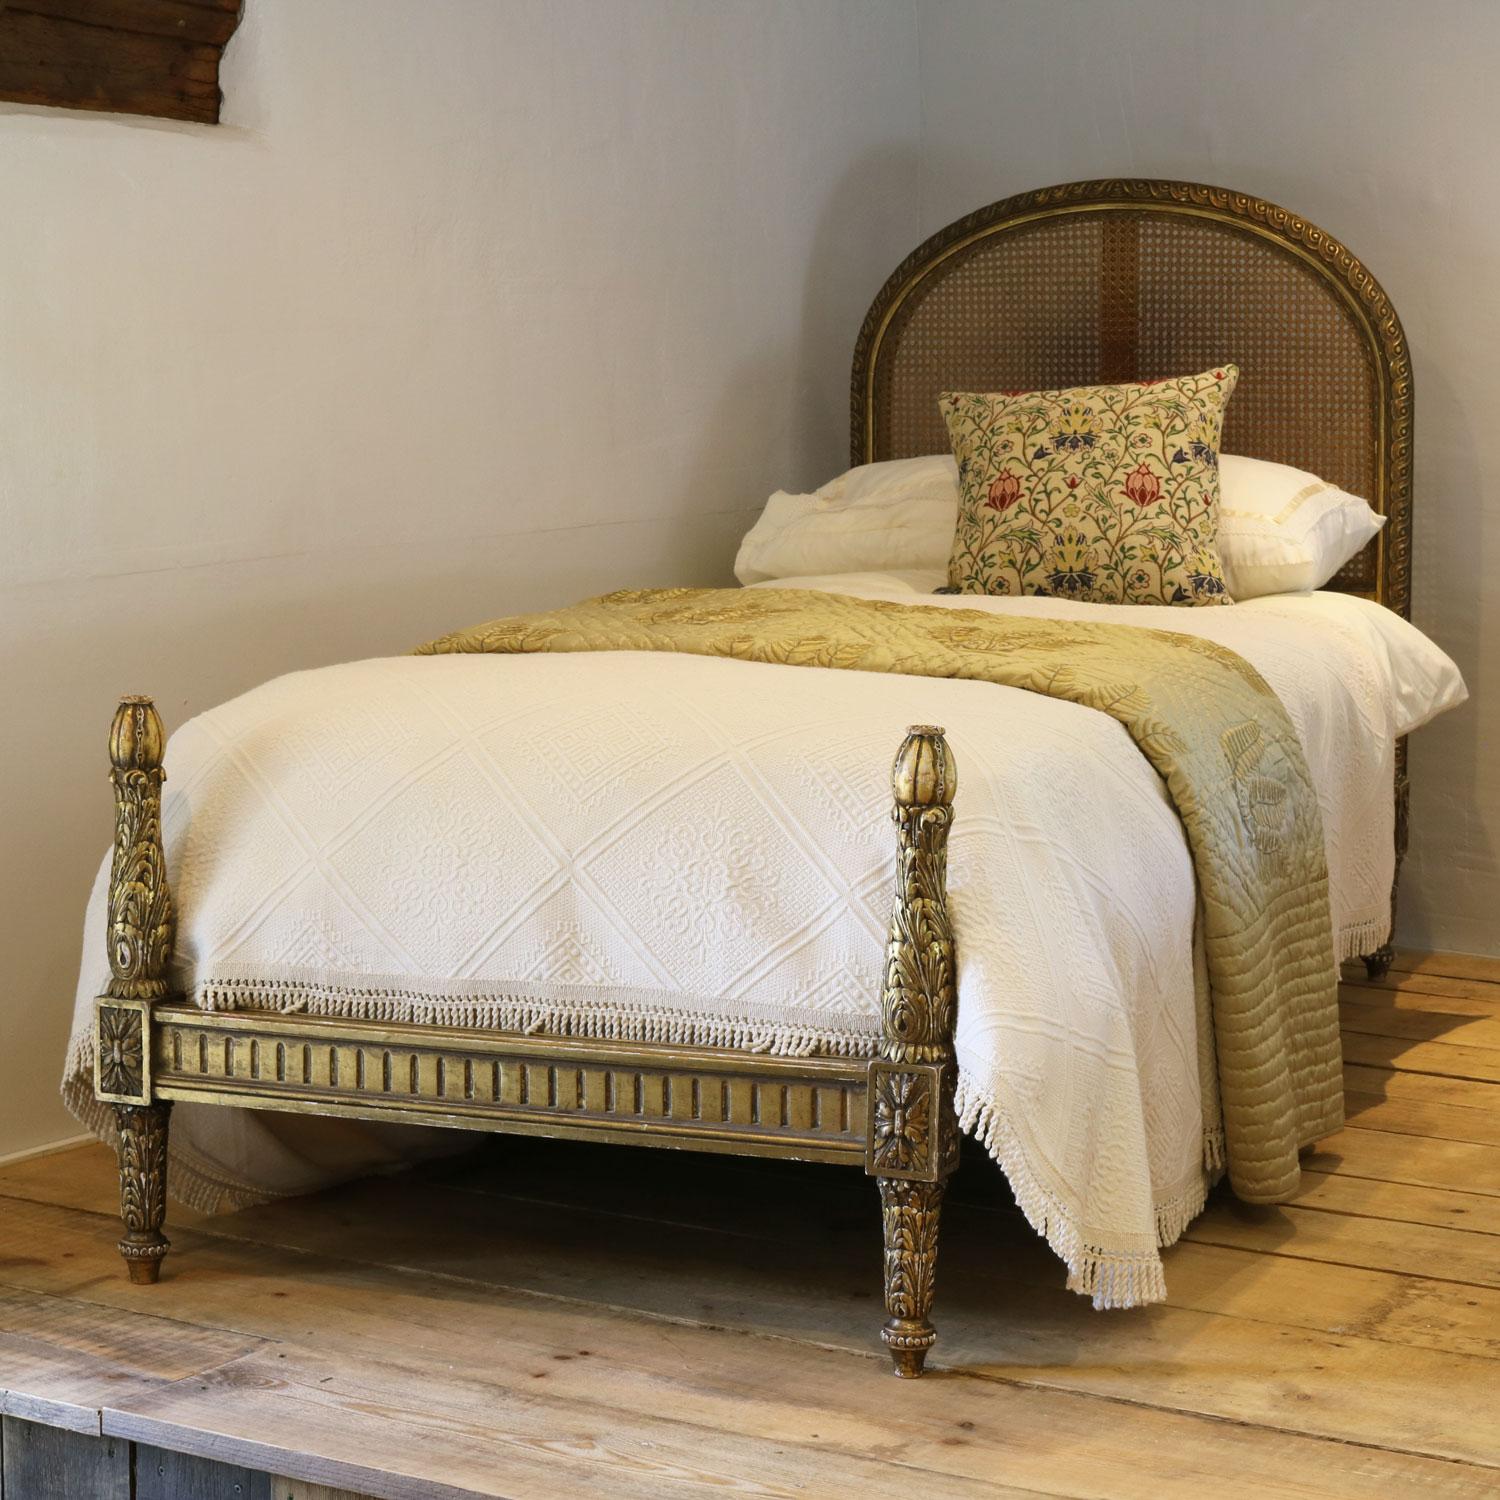 This stunning pair of matching single beds are in the Louis XVI style, and have caned rattan head boards and gilded frame. 

The price is for the beds and two standard firm bed bases. The mattresses and bedding are extra and can be